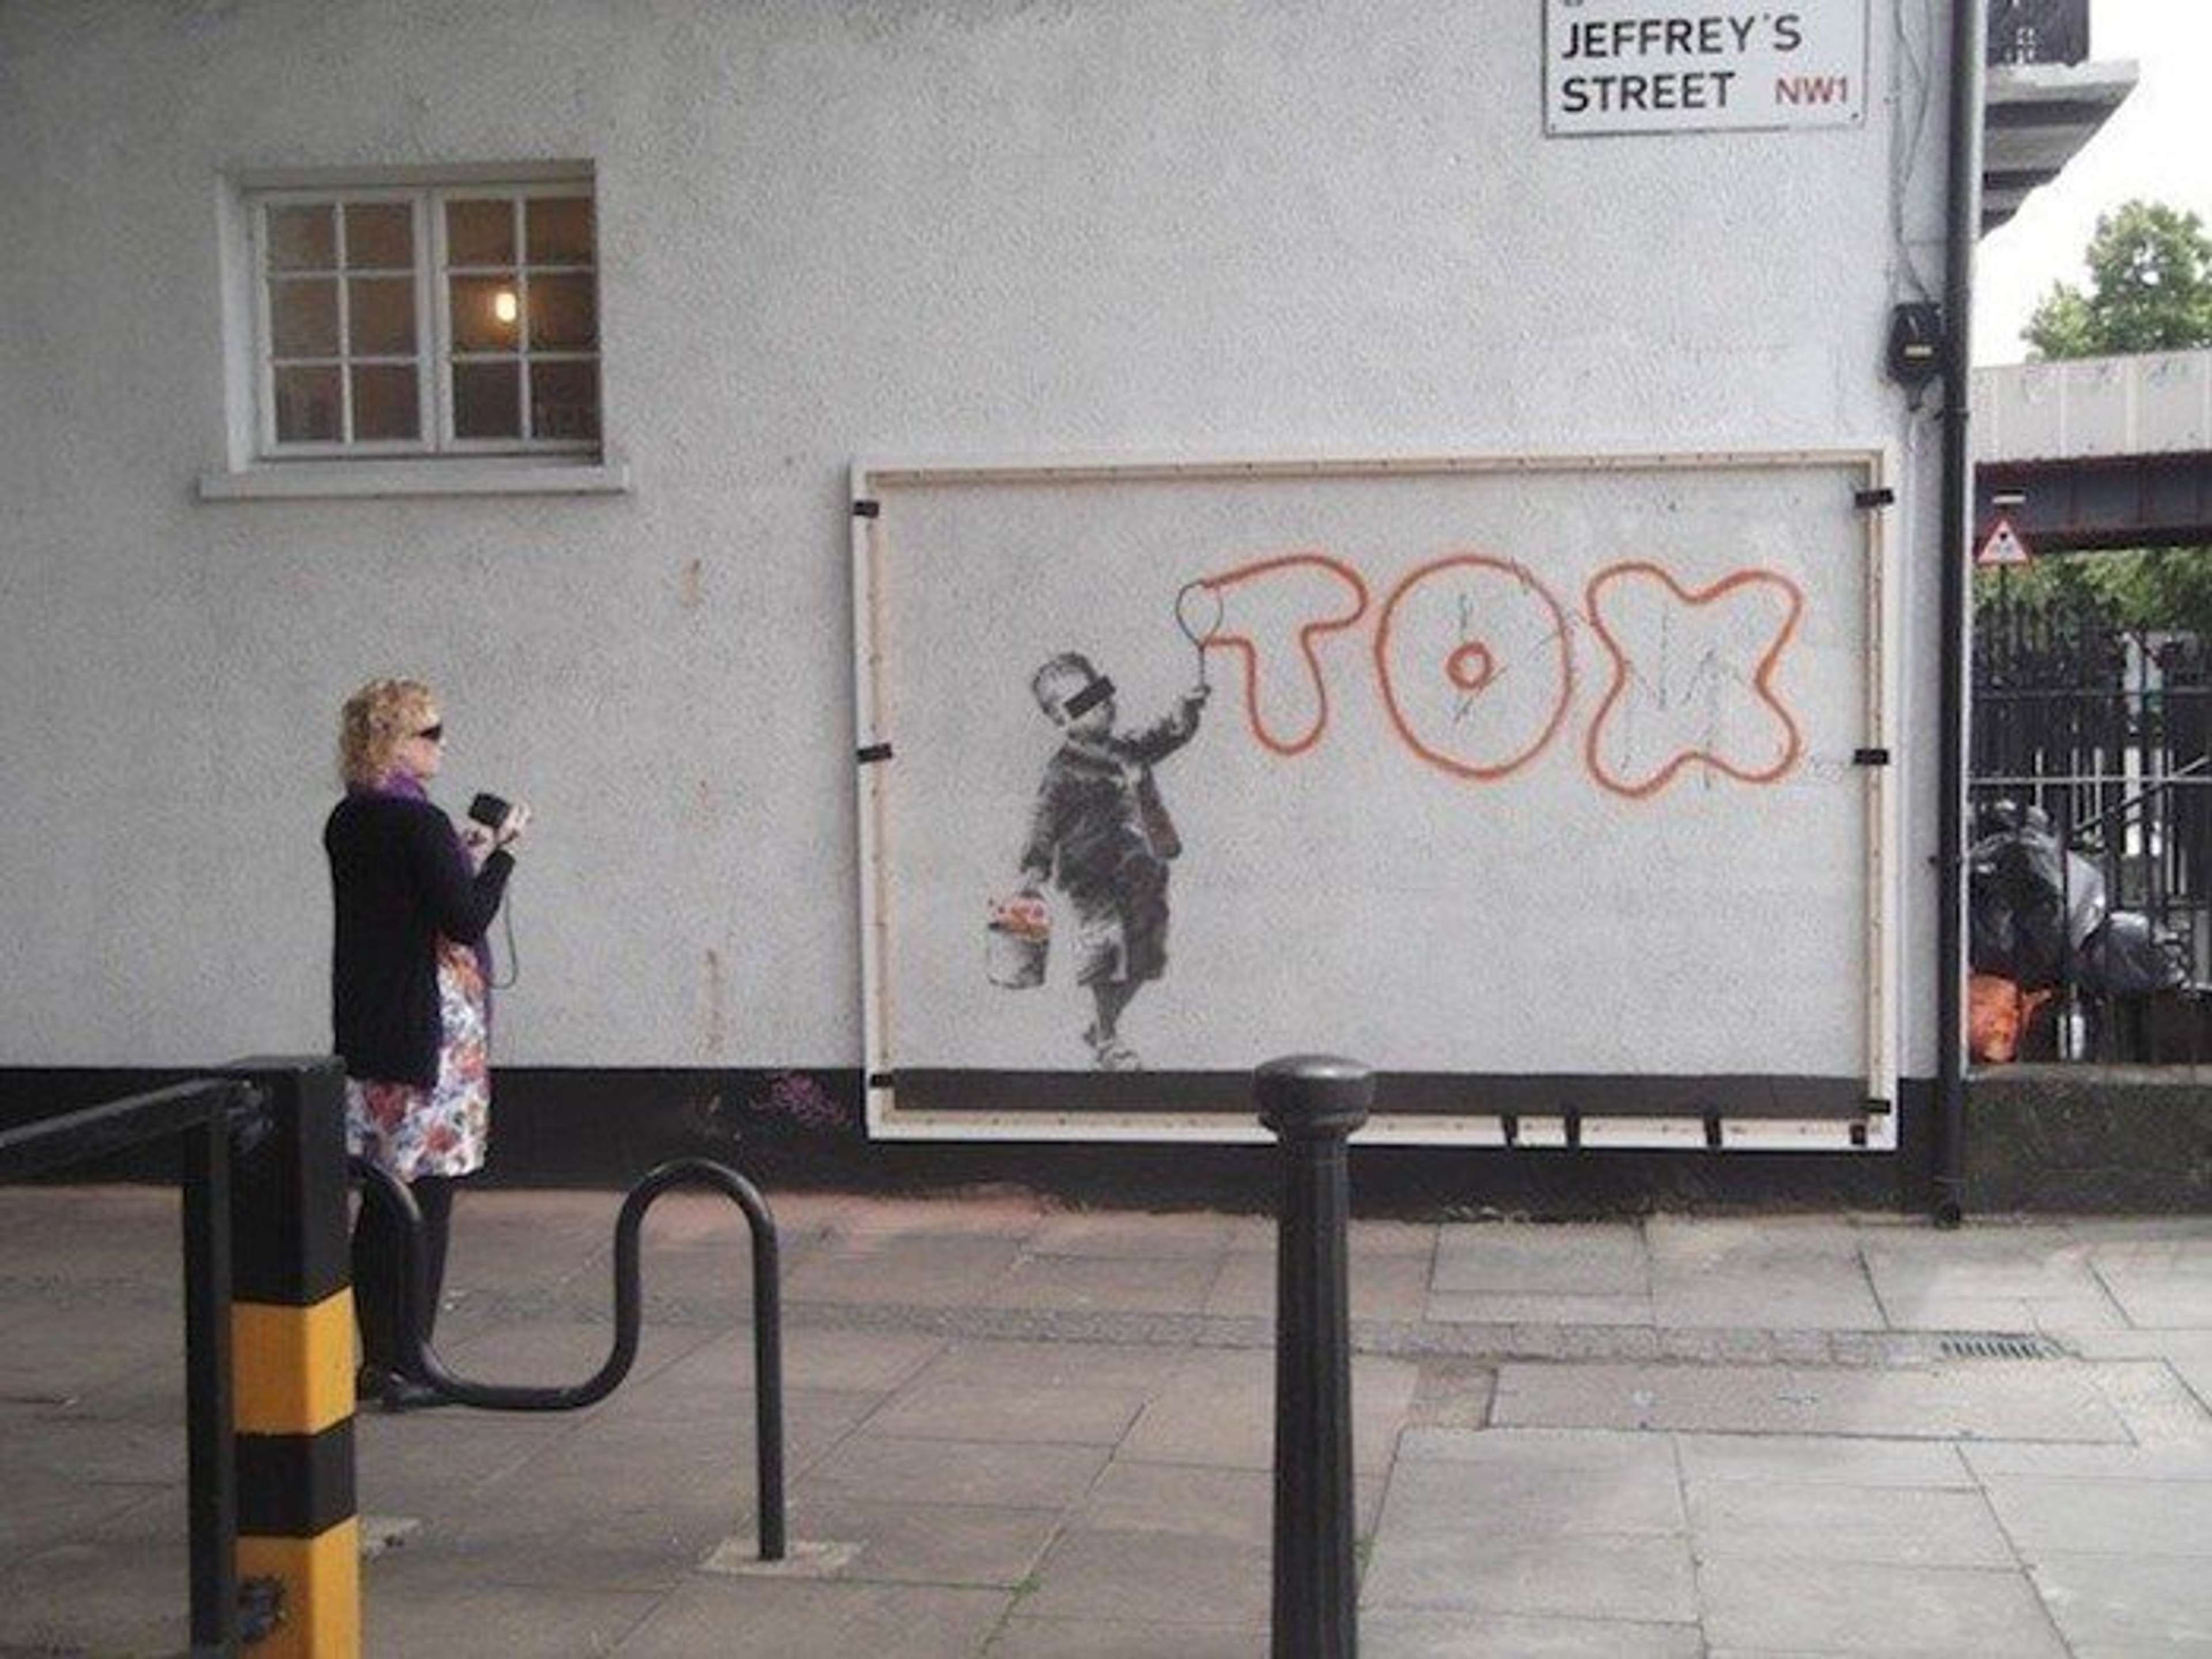 Tox by Banksy